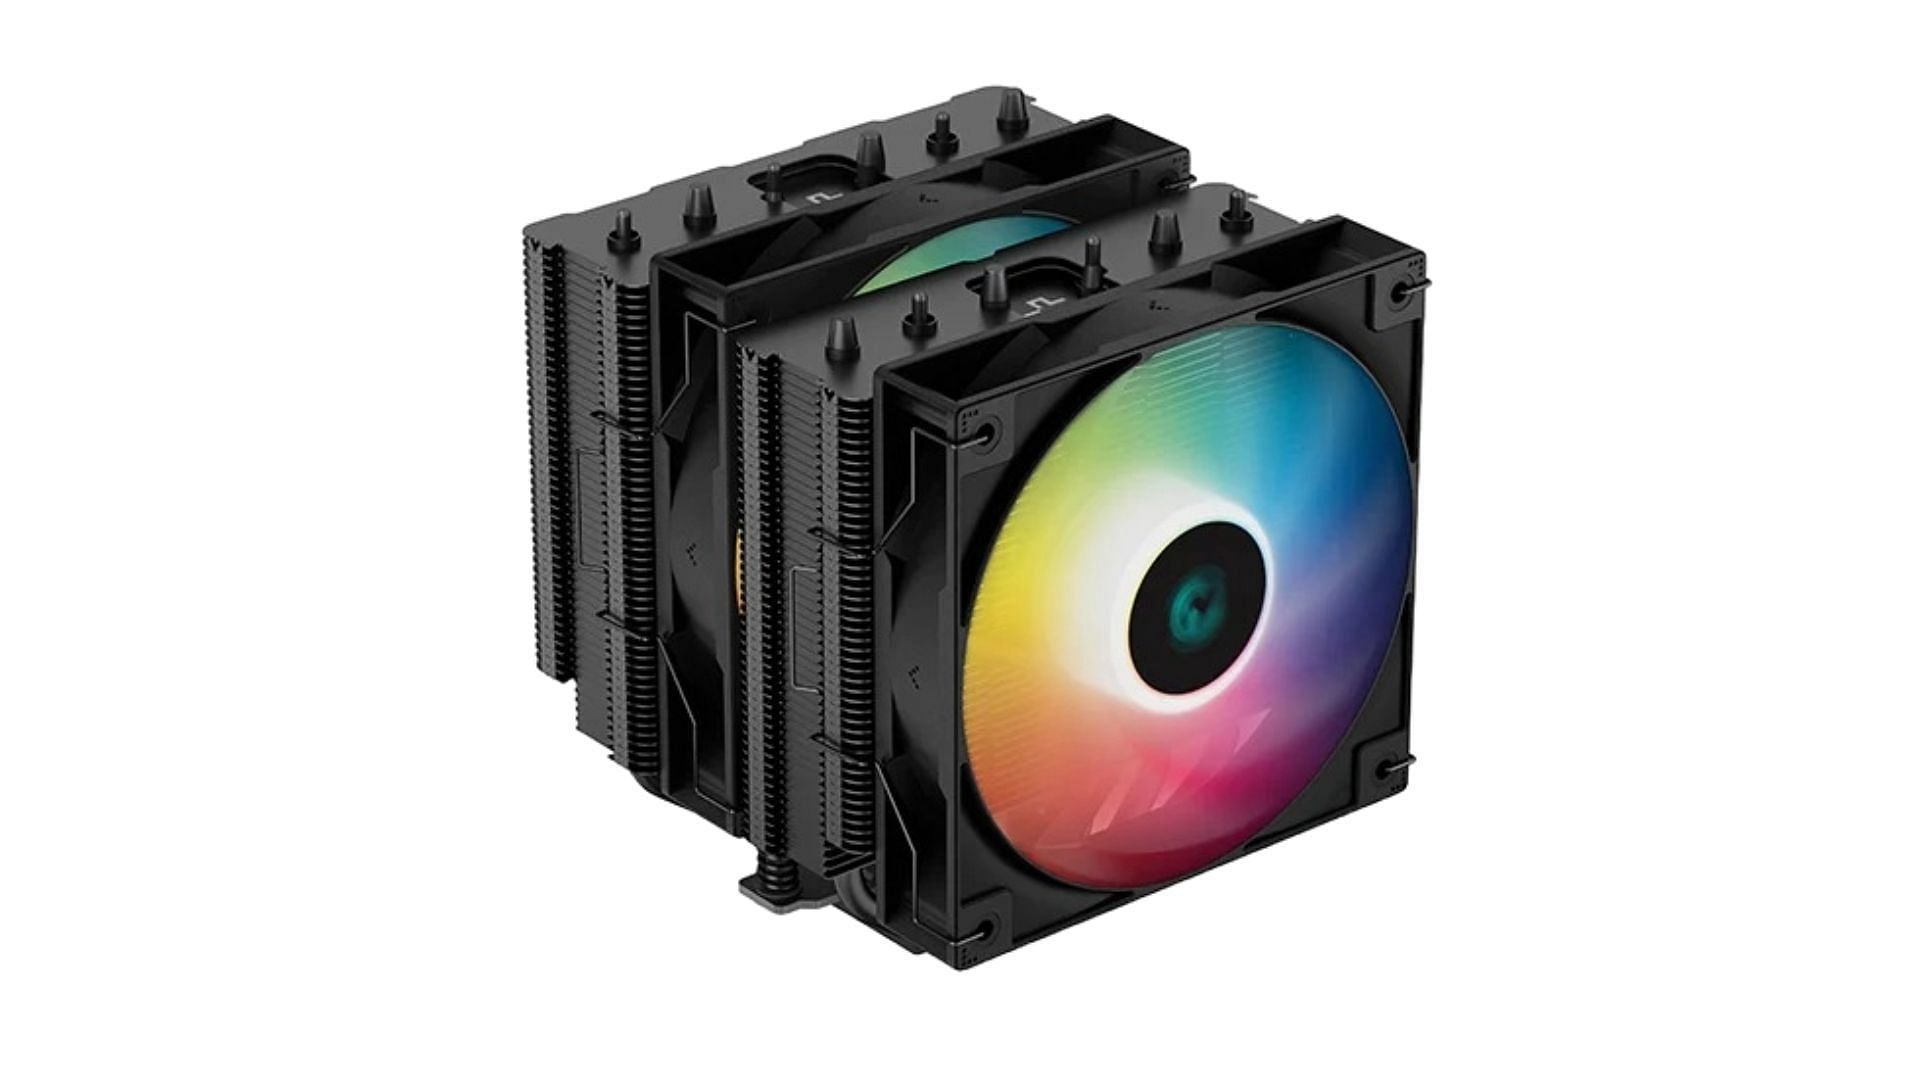 The DeepCool AG620 BK ARGB is among the best budget CPU air coolers (Image via DeepCool)